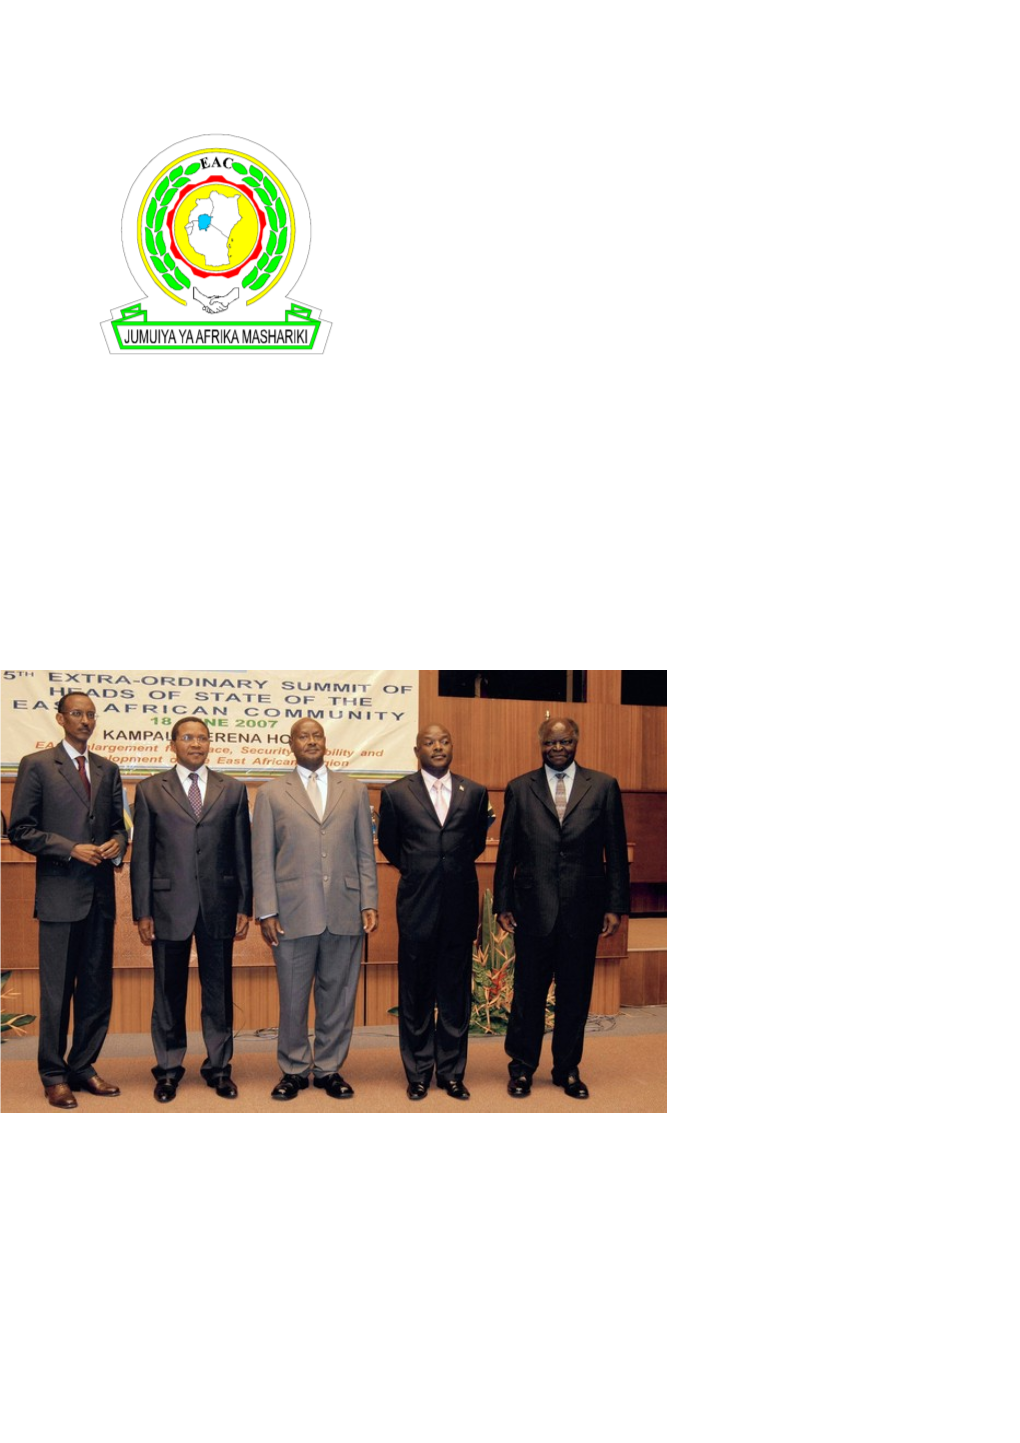 The East African Community: Union of Governments Or Union of the People? s1